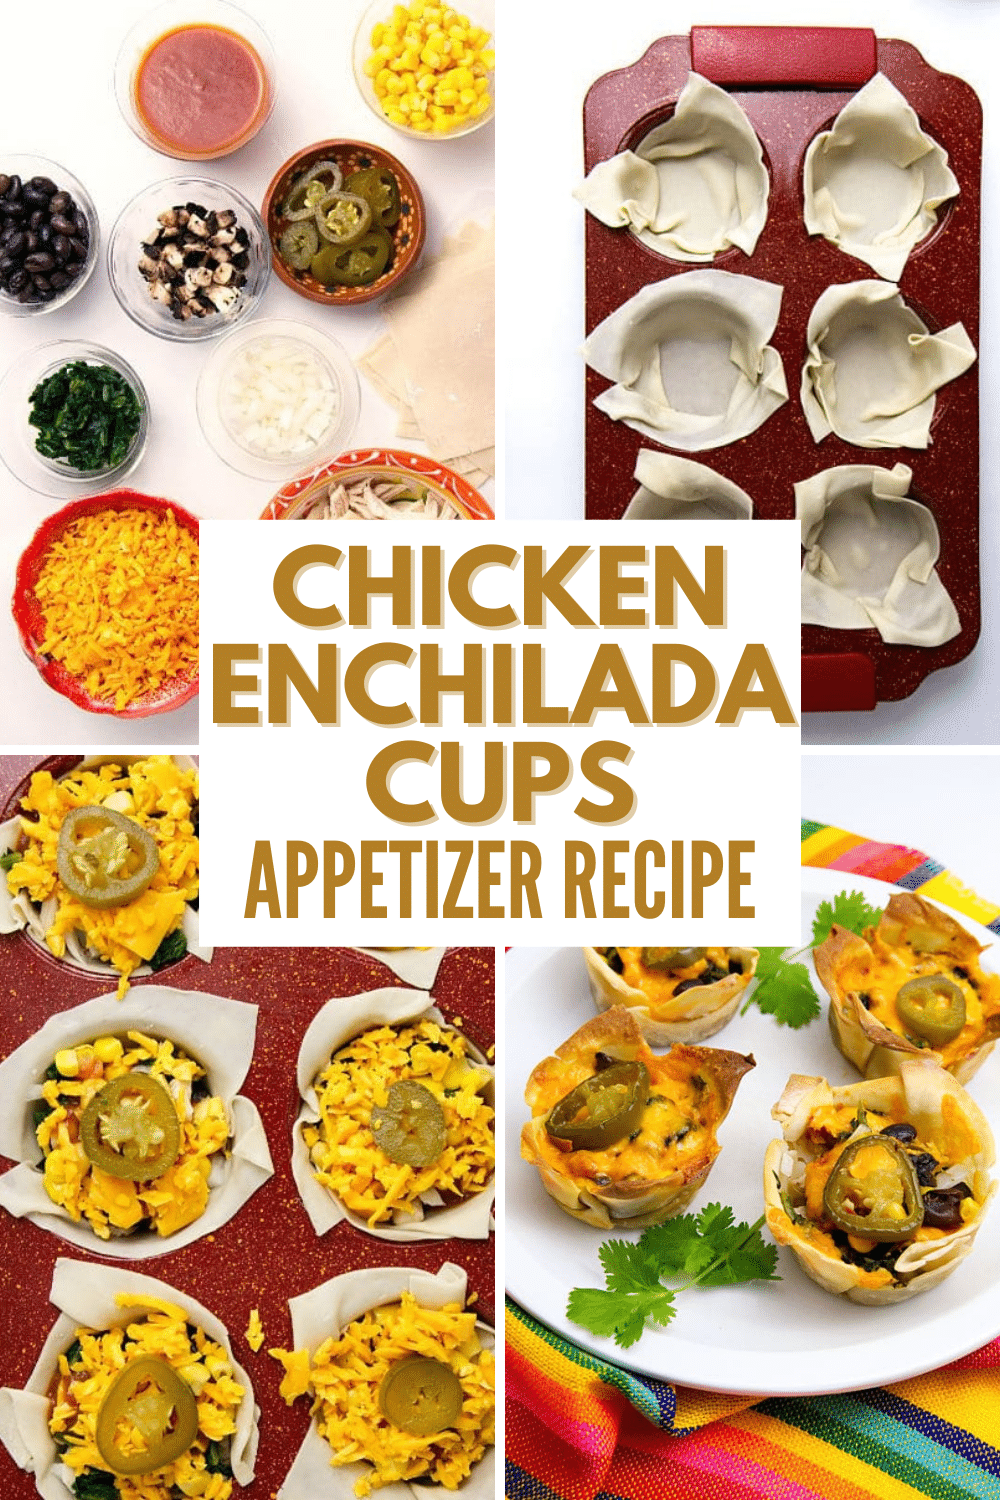 These chicken enchilada cups are so yummy and really easy to make! They work both as a tasty appetizer or kid-friendly dinner since the kids can choose their own ingredients. #appetizers #fingerfoods #Mexicanrecipes via @wondermomwannab